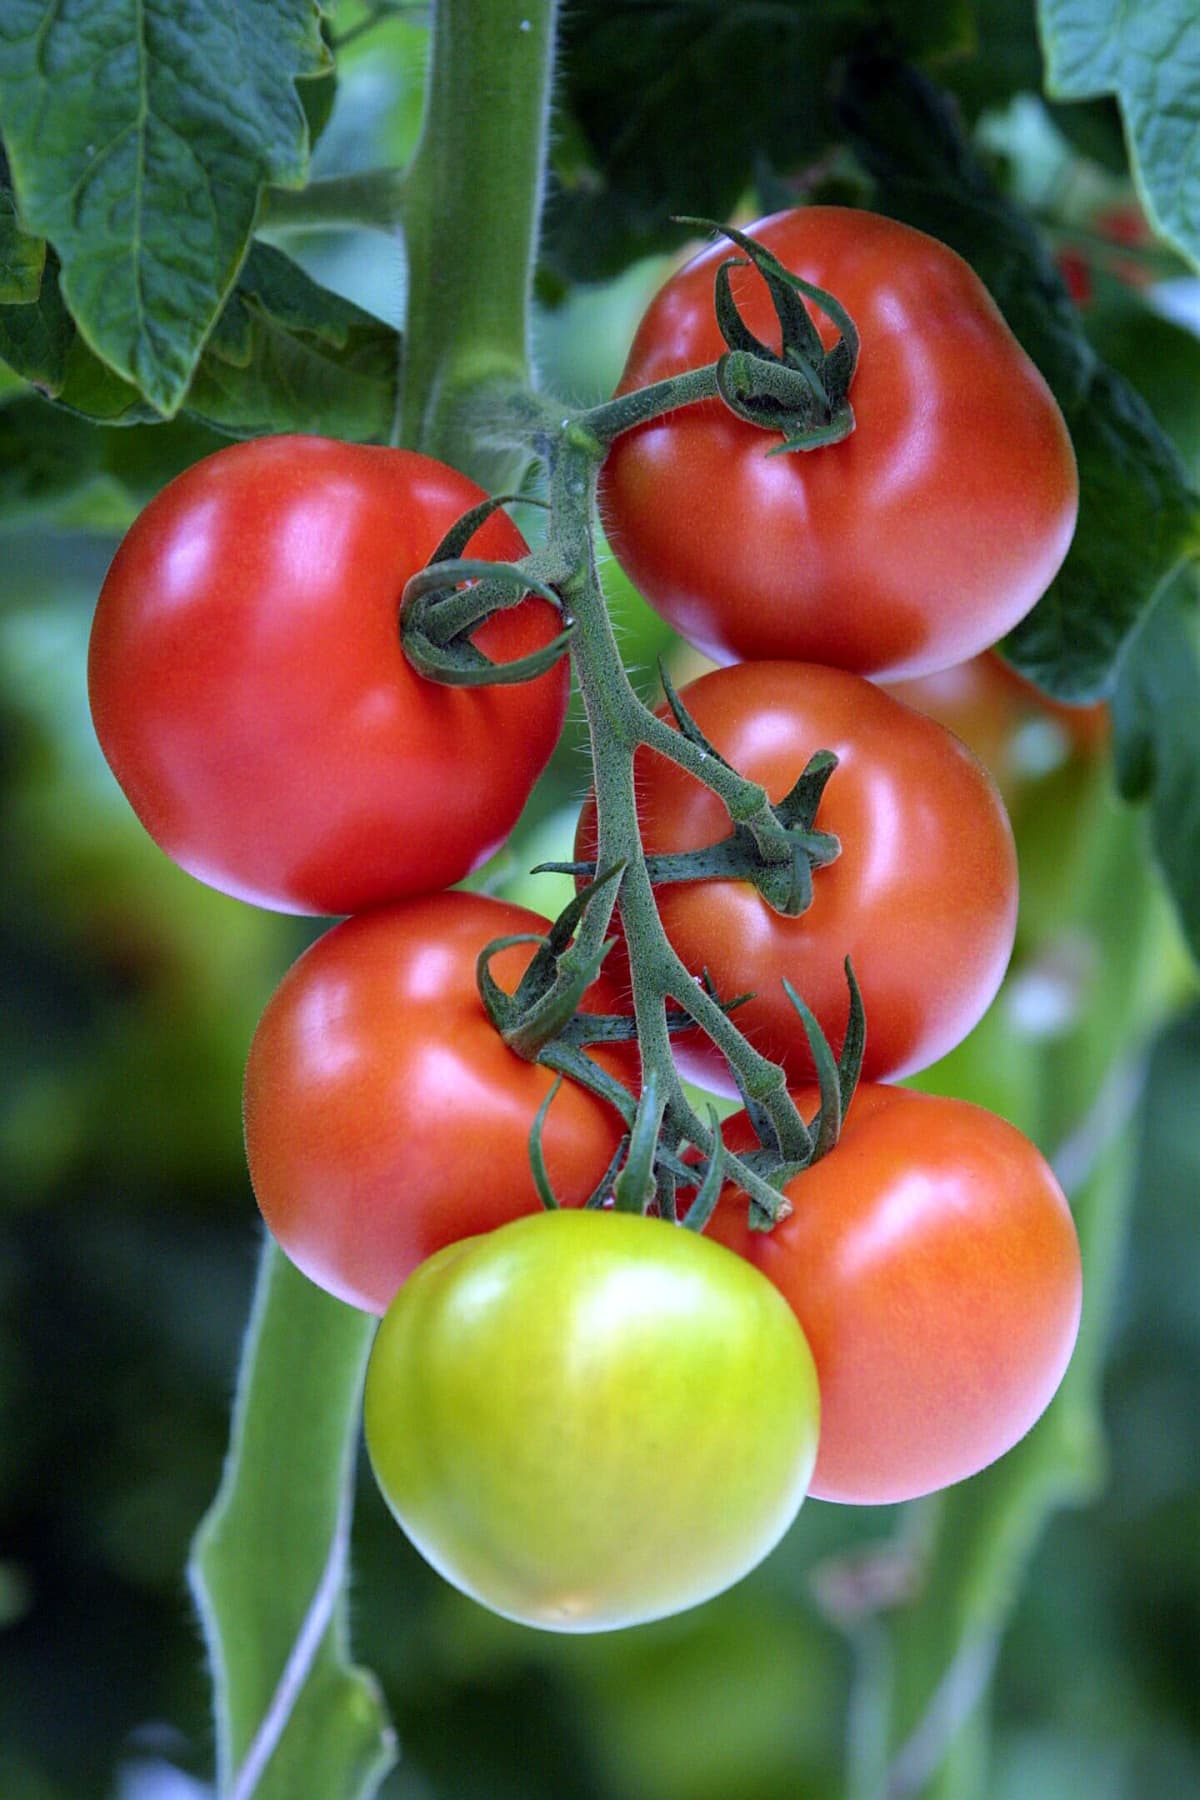 Stock shot of Tomatoes on the plant in a local hot house.